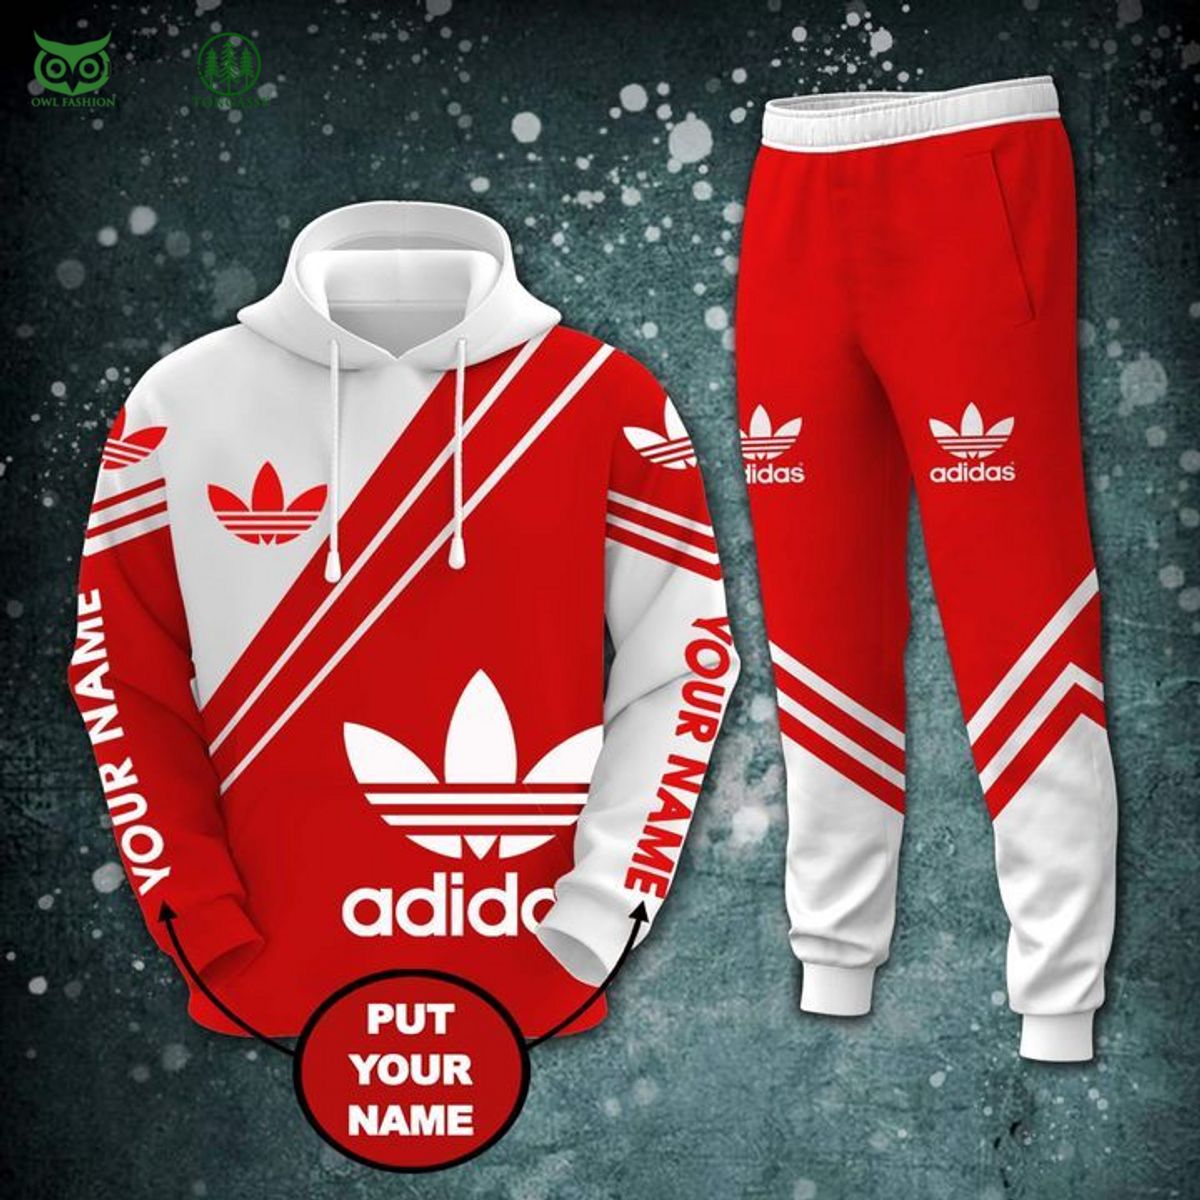 adidas famous sport brand red personalized hoodie and pants 1 L9TFj